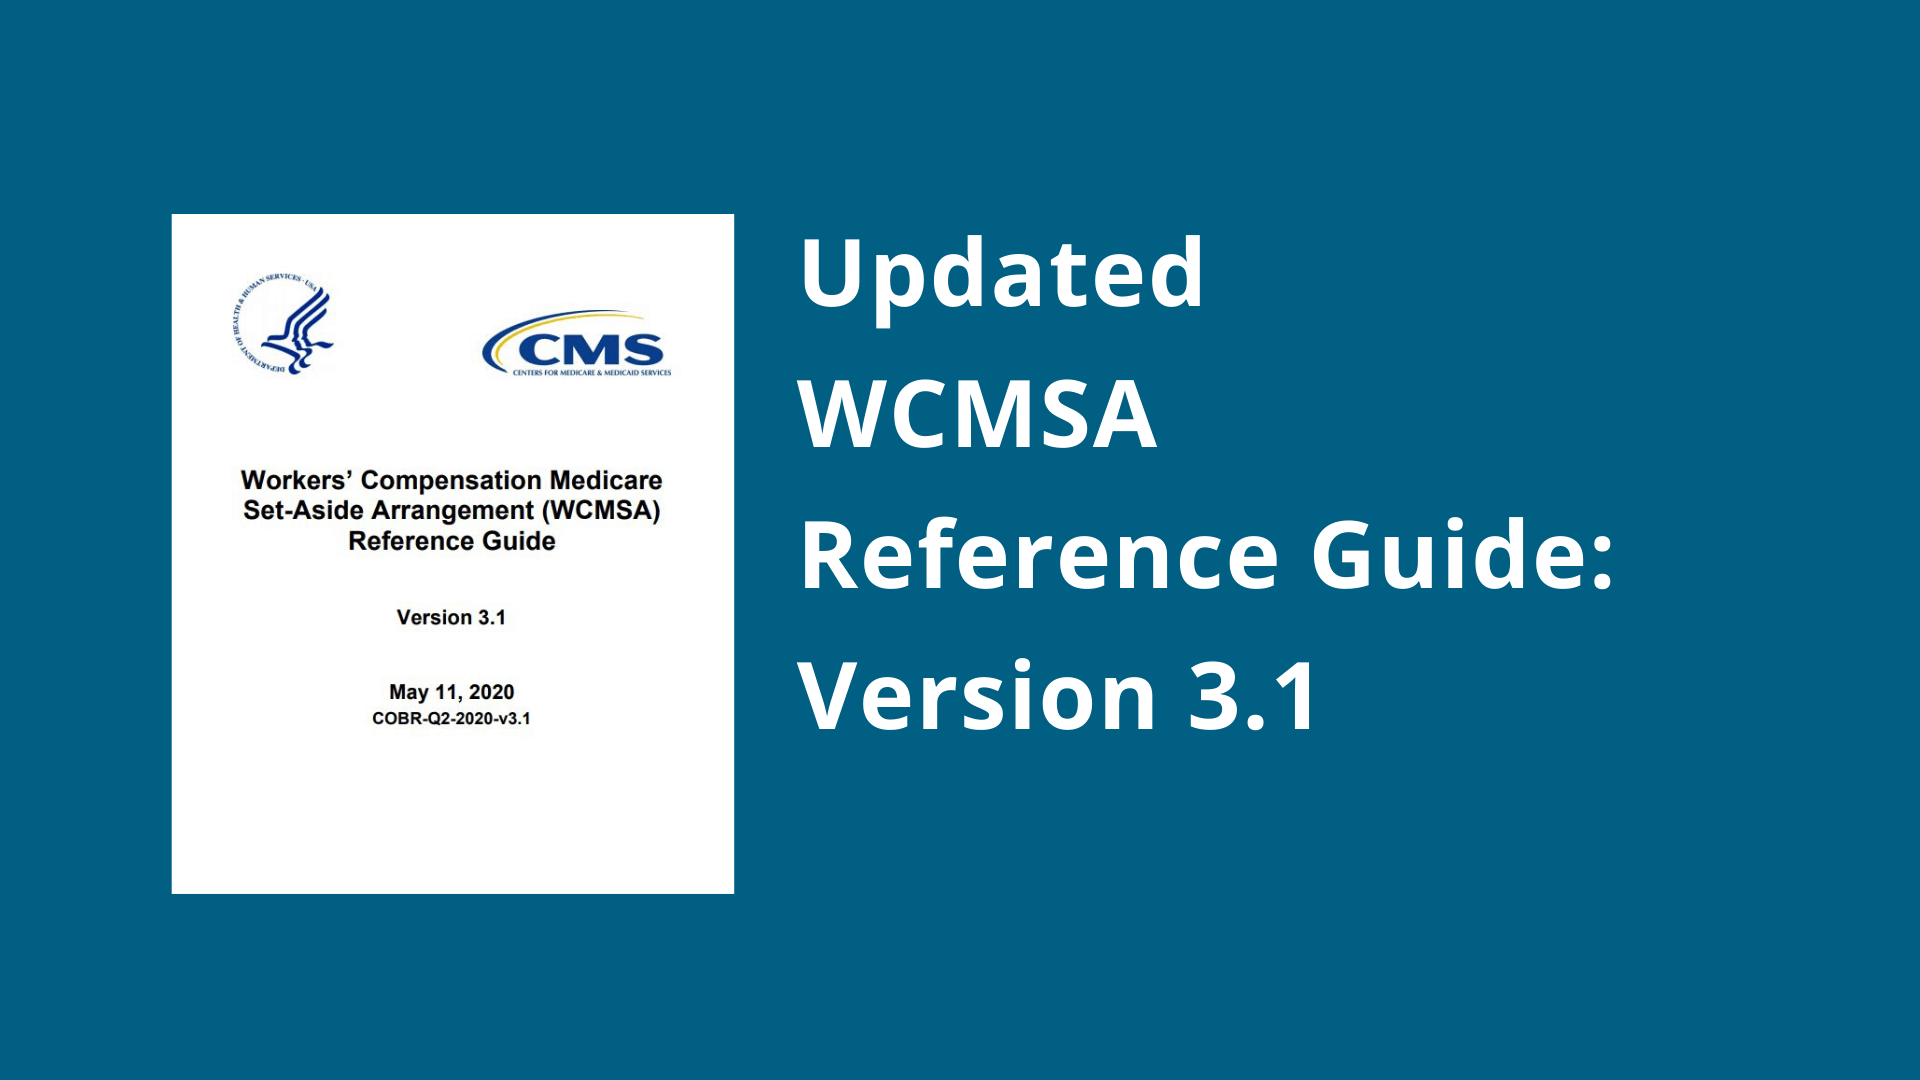 CMS Releases Updated WCMSA Reference Guide Ametros